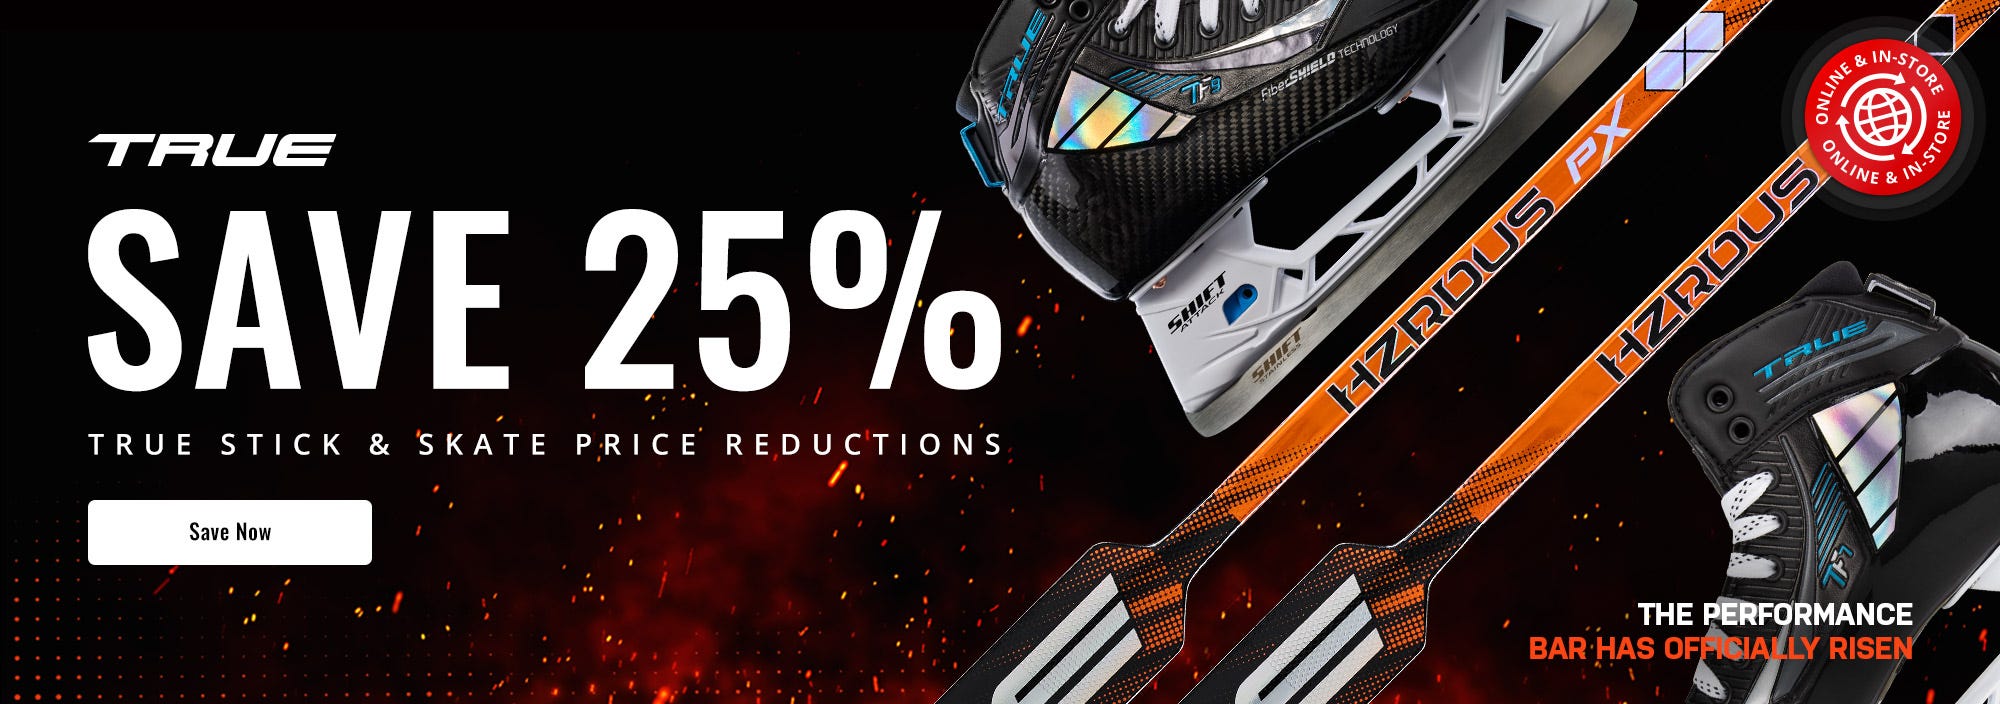 True Price Reductions: Save on HZRDUS Sticks and TF9/TF7 Skates